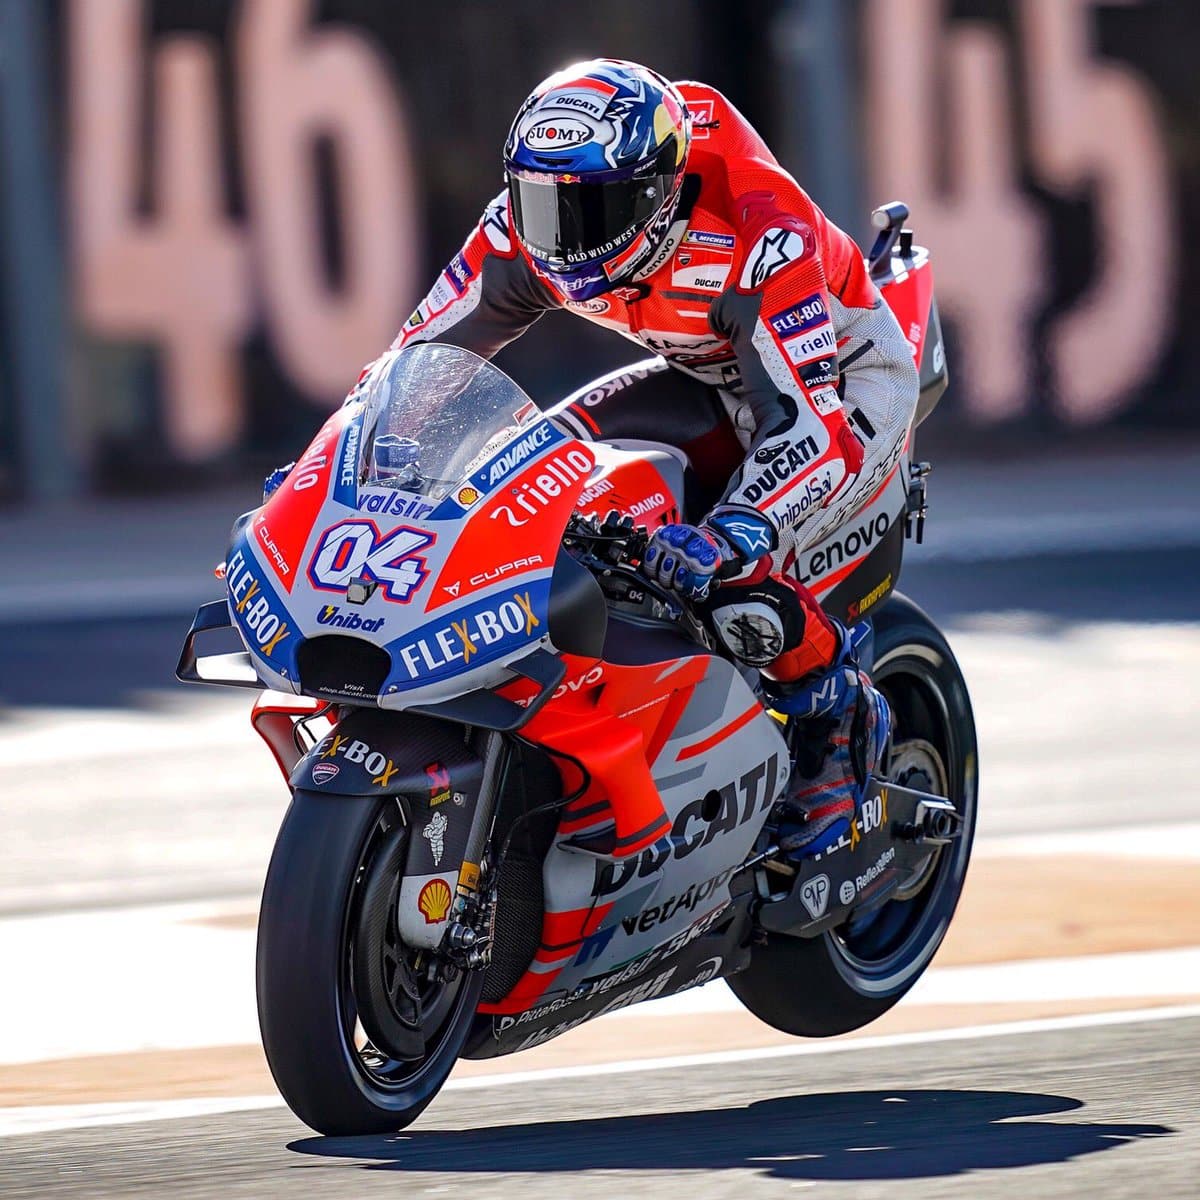 MotoGP 2019, Andrea Dovizioso: “in 6 years of collaboration, Ducati and I have never made a mistake”.